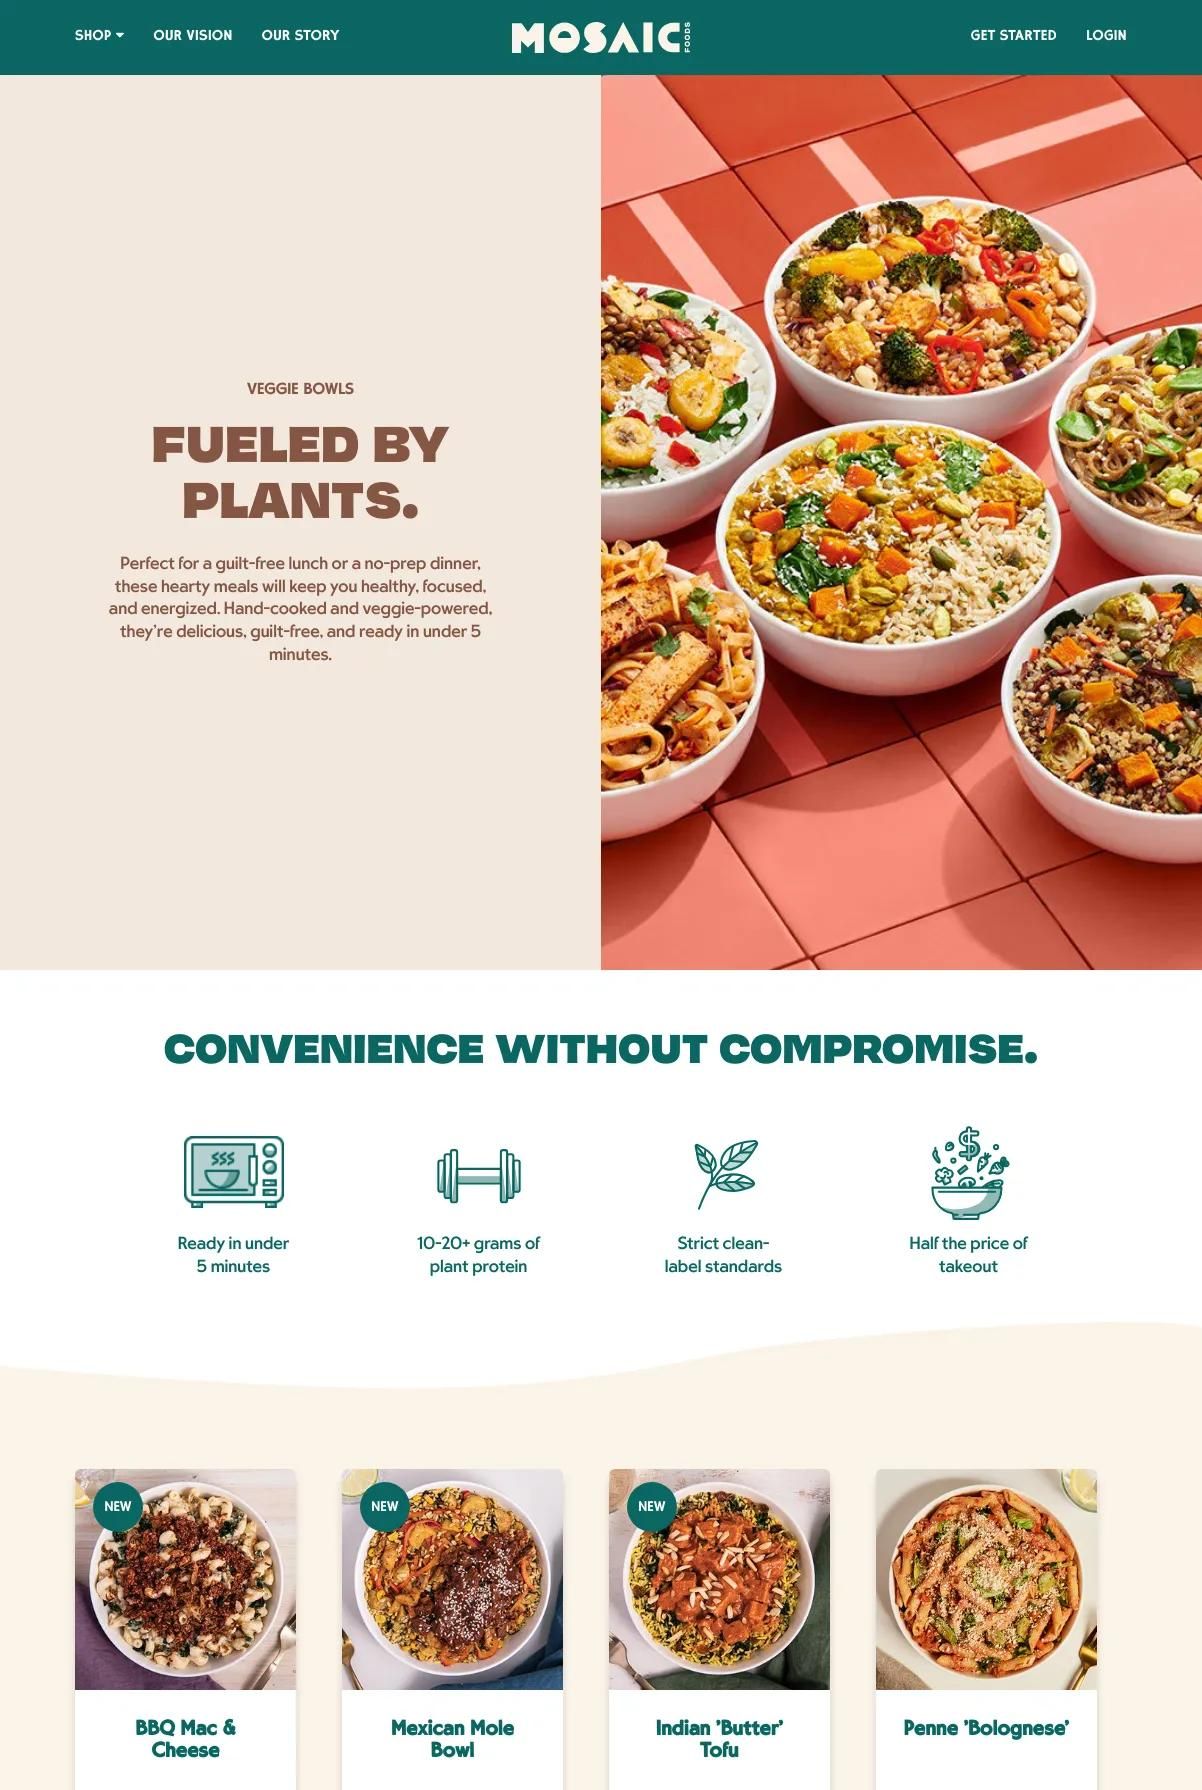 Screenshot 2 of Mosaic Foods (Example Shopify Food and Beverage Website)